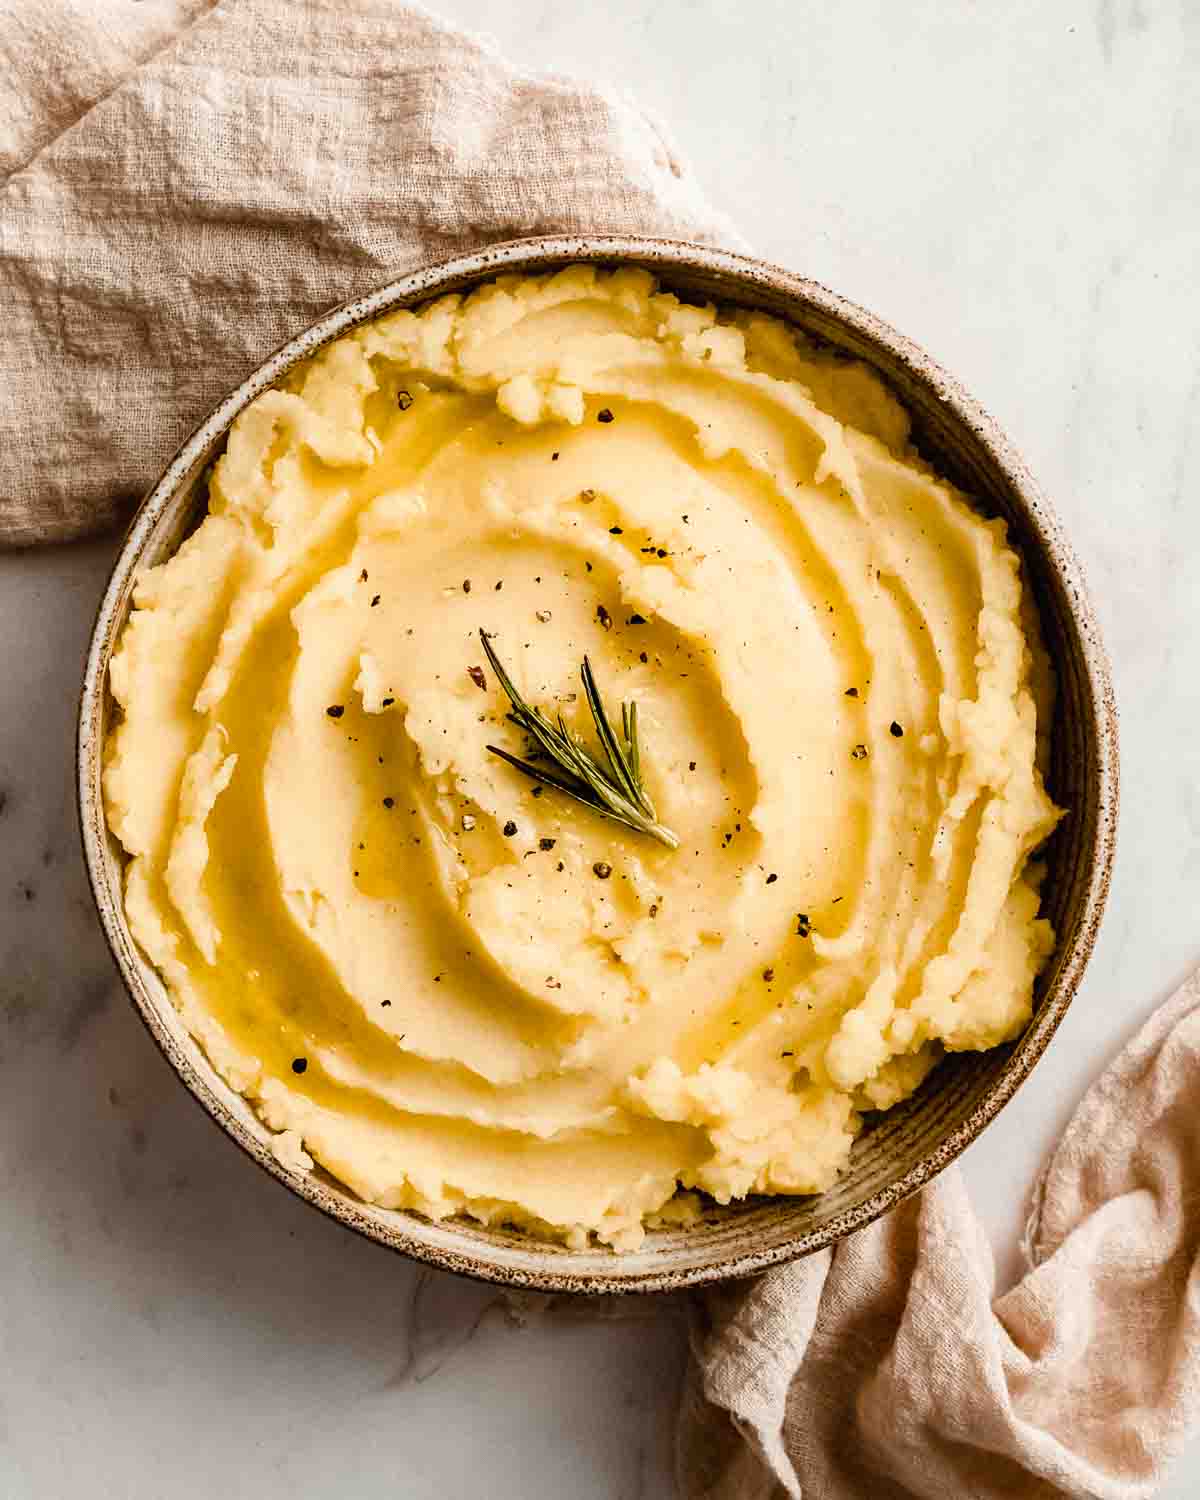 mashed potatoes without butter in a bowl topped with fresh rosemary and black pepper.